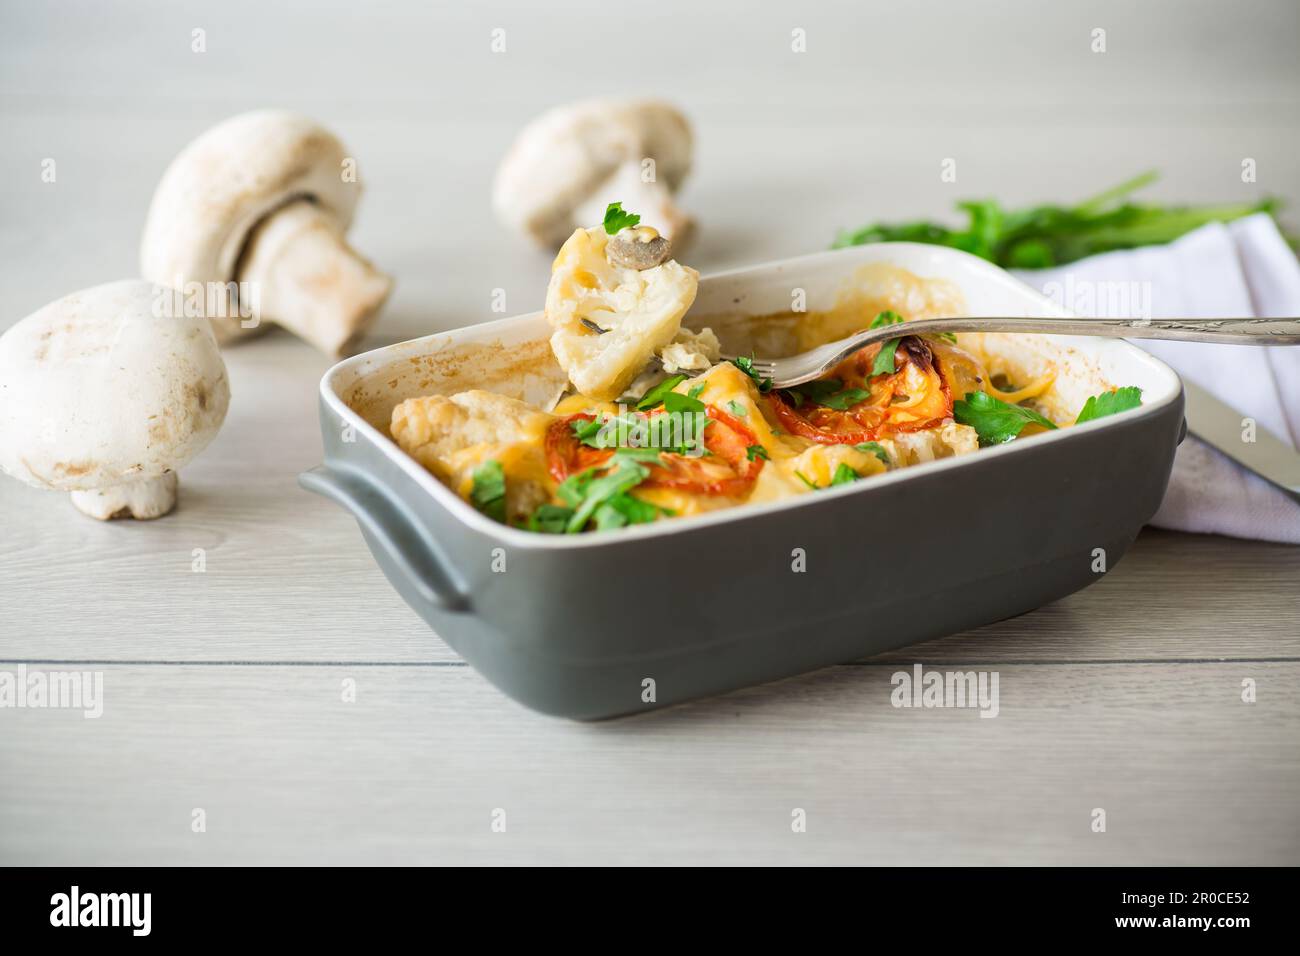 cauliflower baked with chicken fillet and mushrooms under cheese in a ceramic form, on a wooden table. Stock Photo